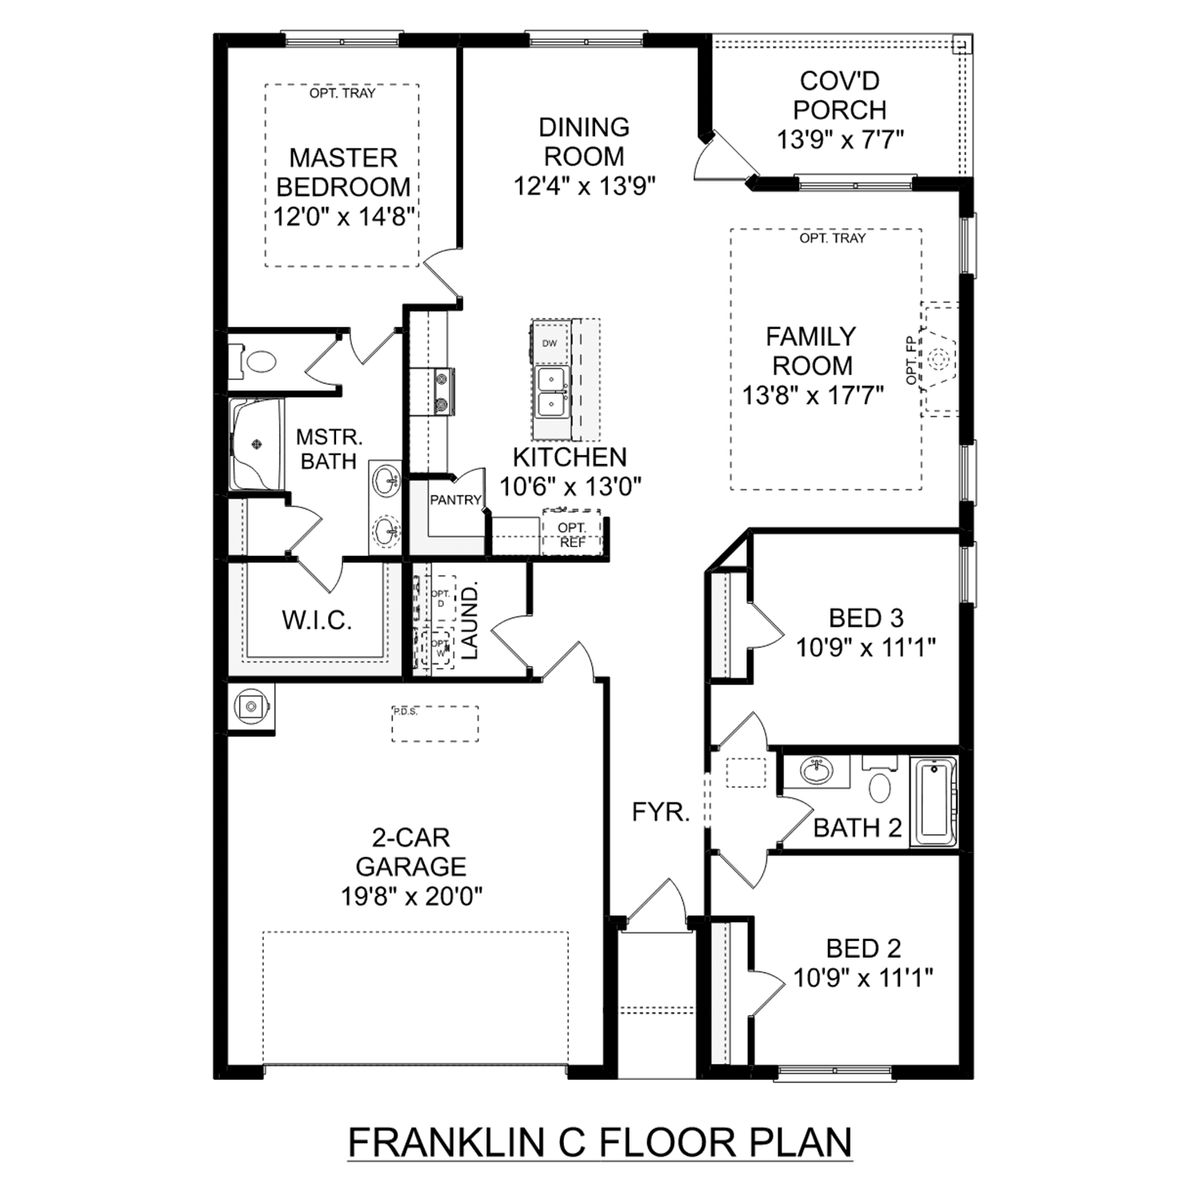 1 - The Franklin C floor plan layout for 6254 Pisgah Drive in Davidson Homes' Spragins Cove community.